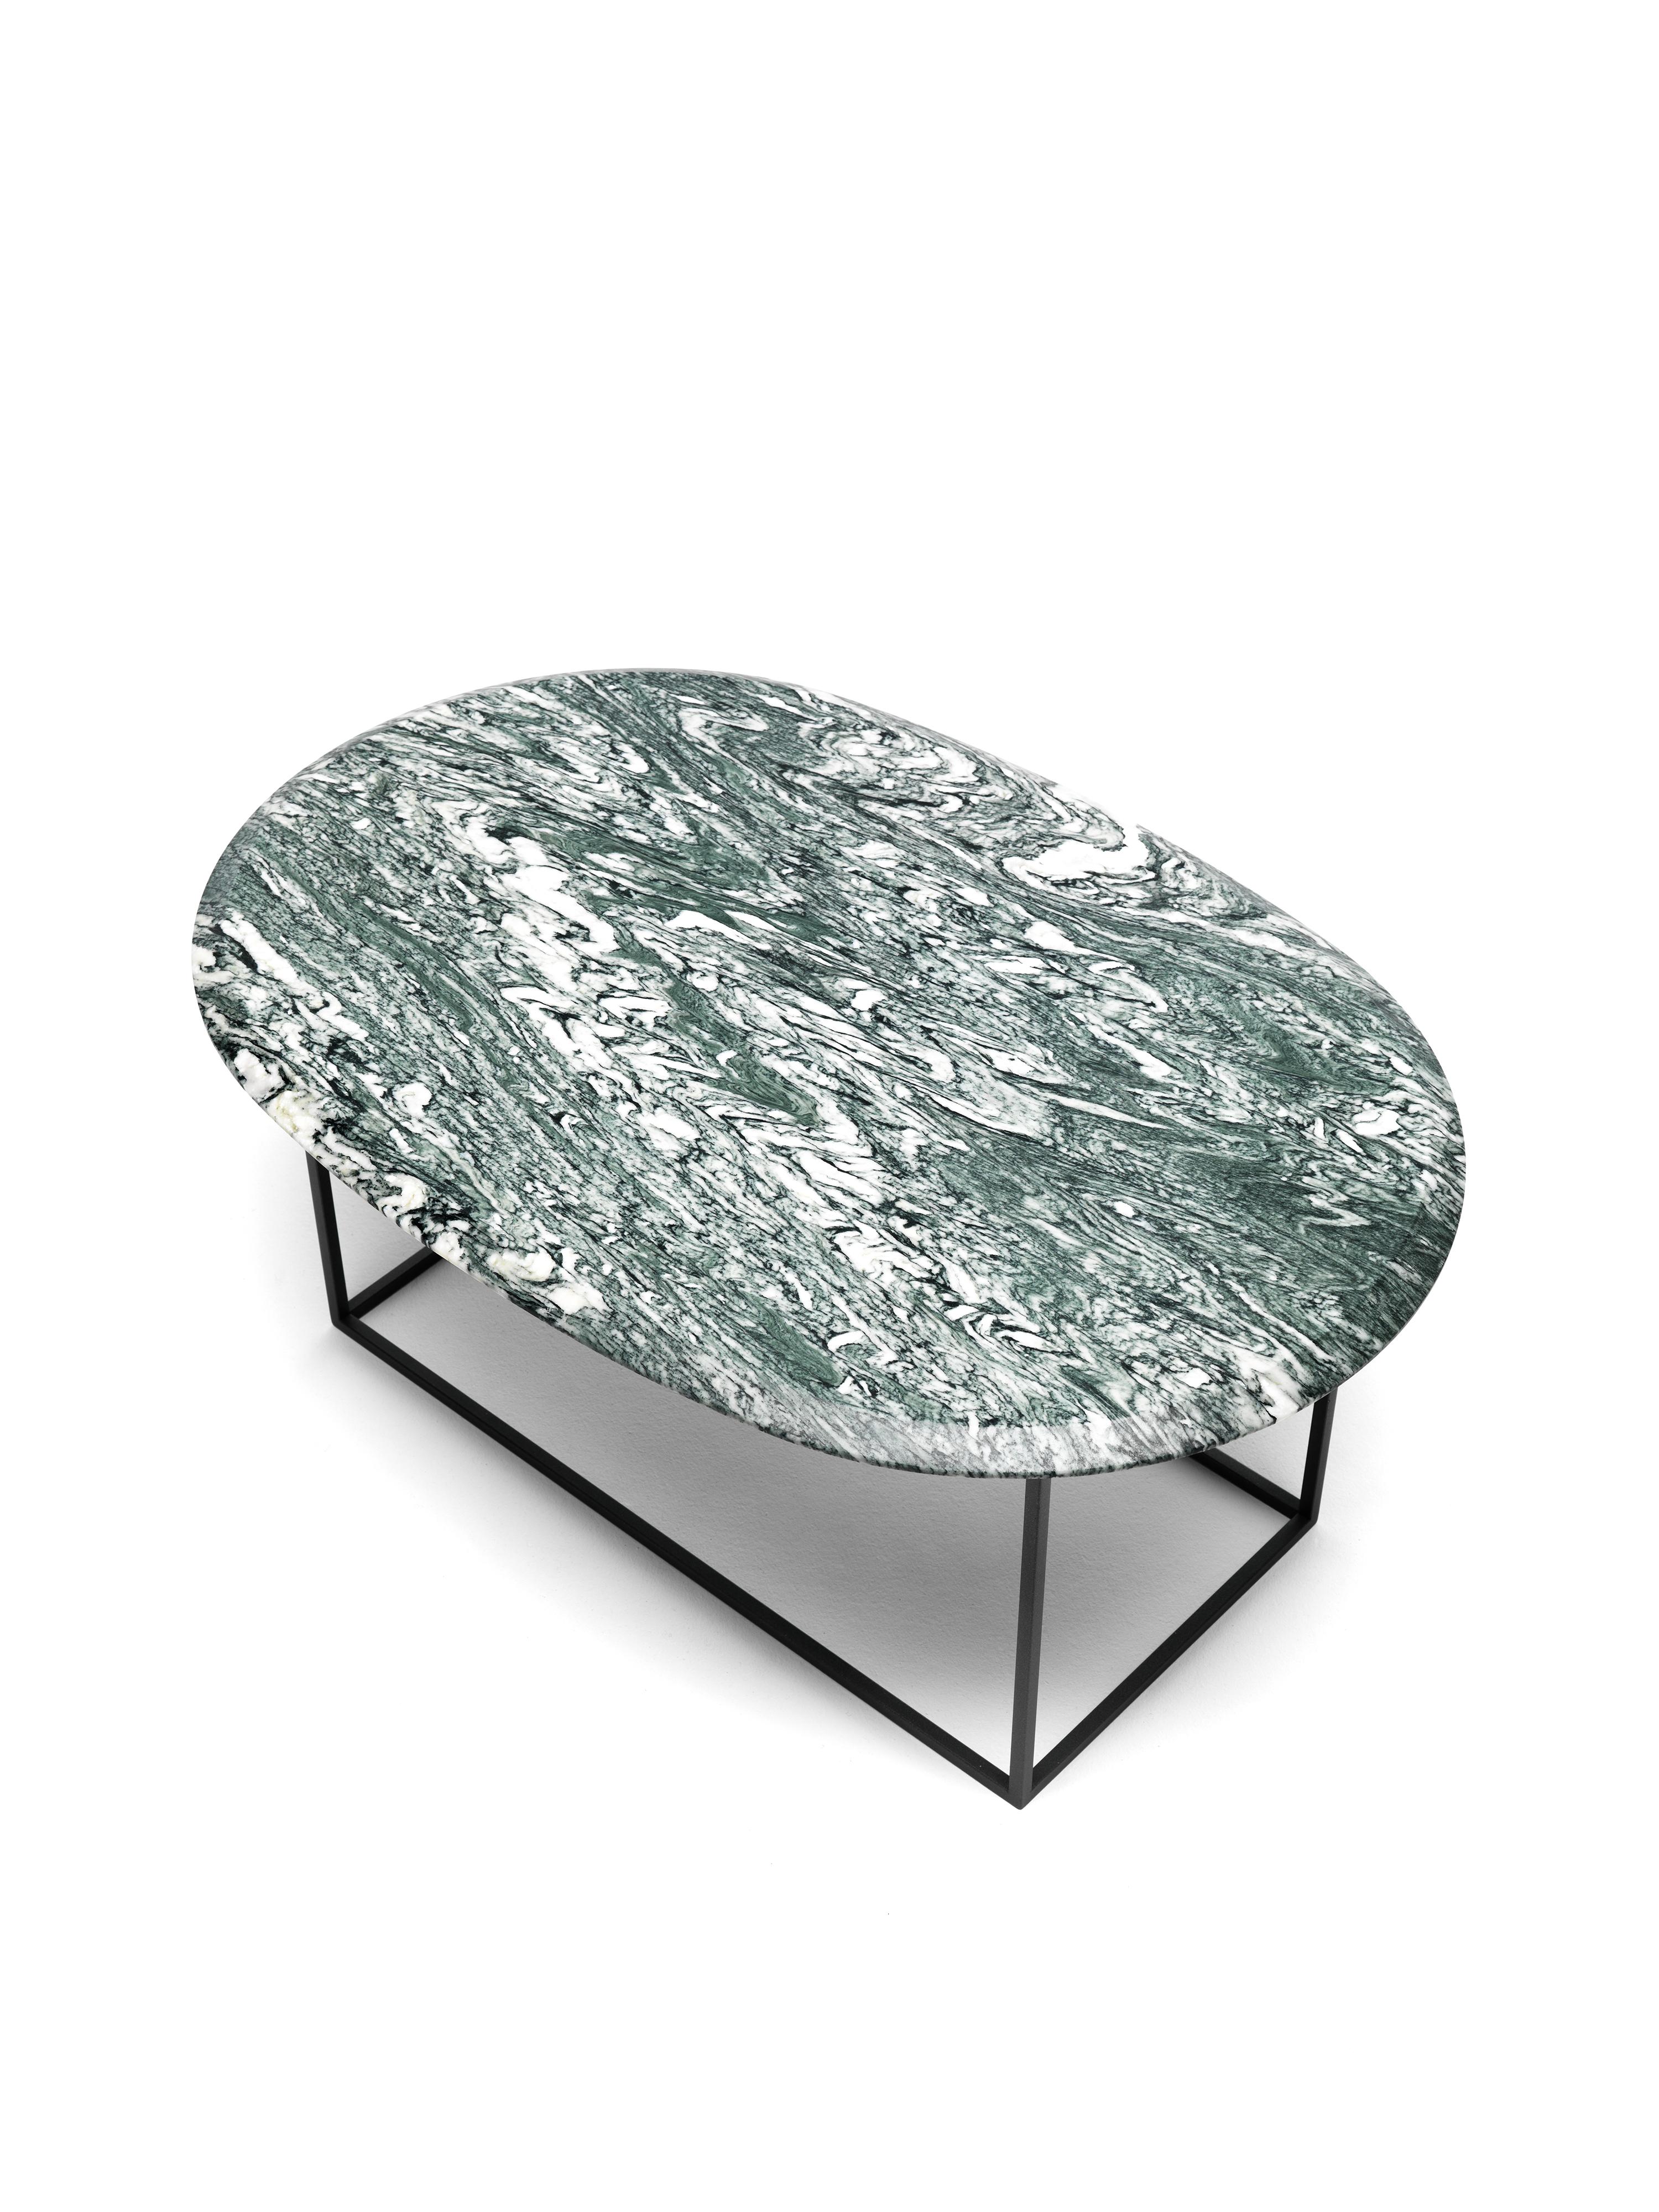 Italian 21st Century Modern Coffee Table With Painted Steel Base And Top In Solid Marble For Sale